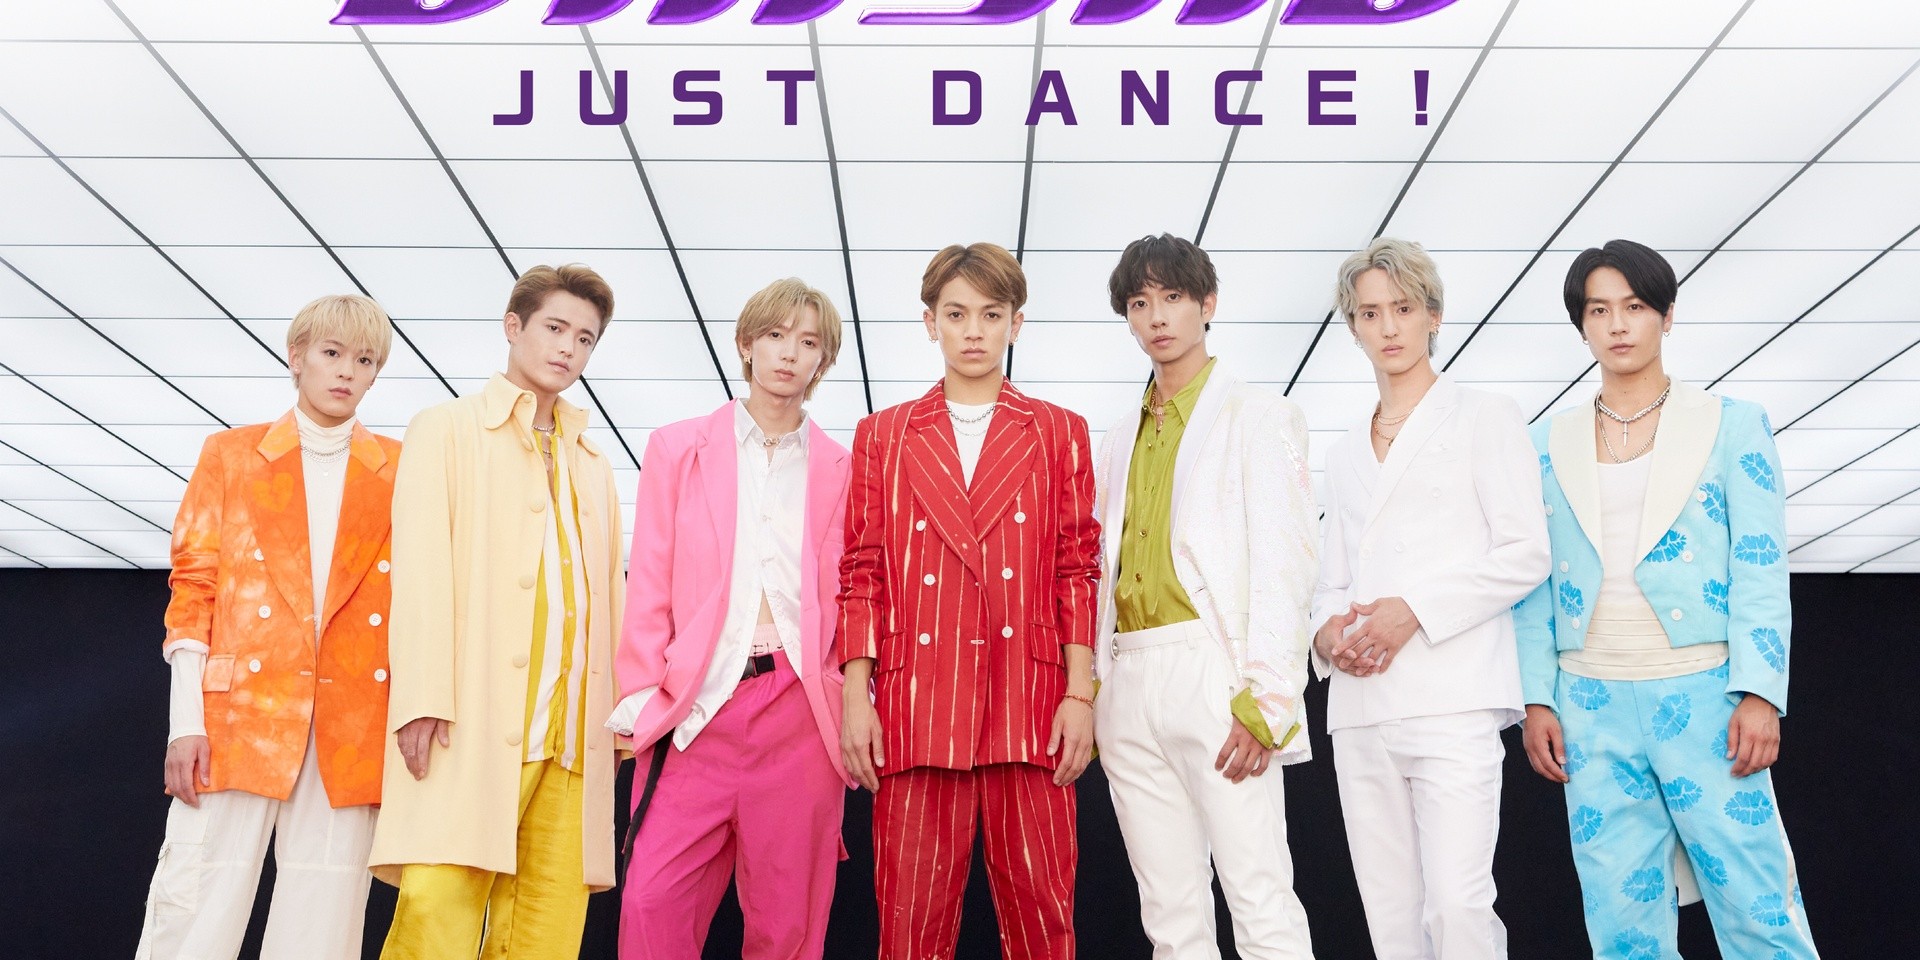 Travis Japan release highly anticipated debut single 'JUST DANCE!' — watch